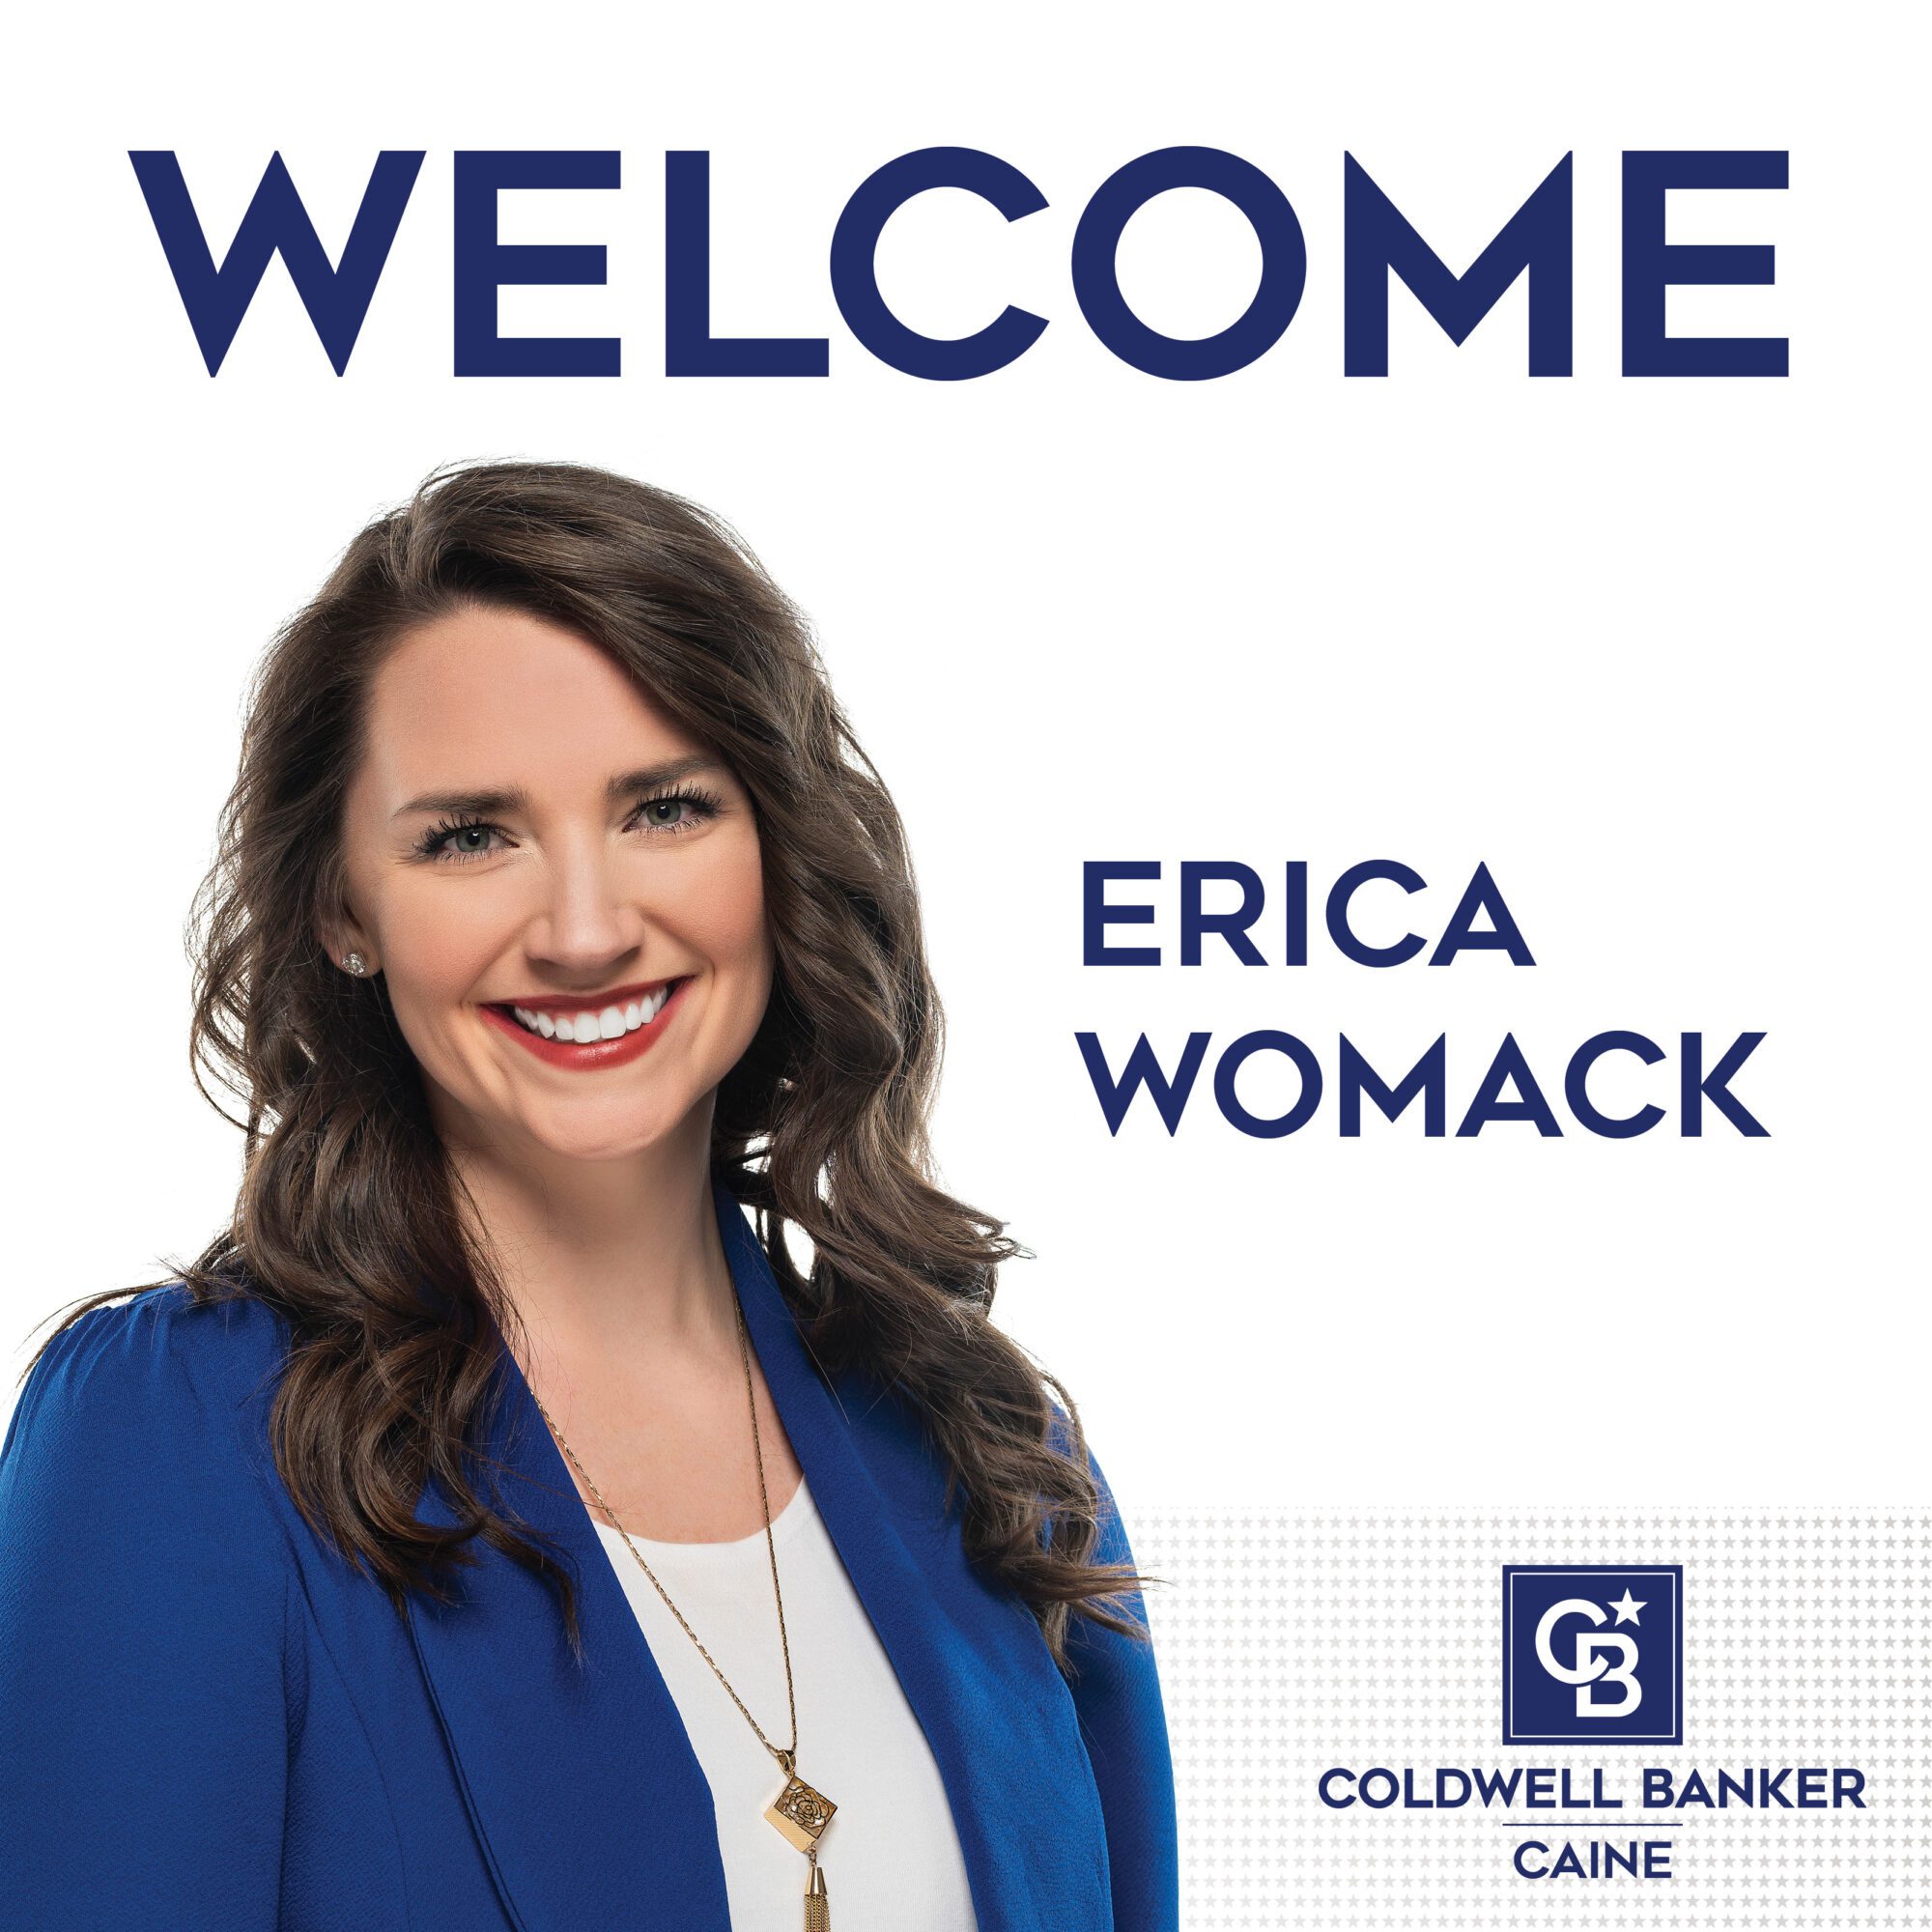 Erica Womack Joins Coldwell Banker Caine in Greenville